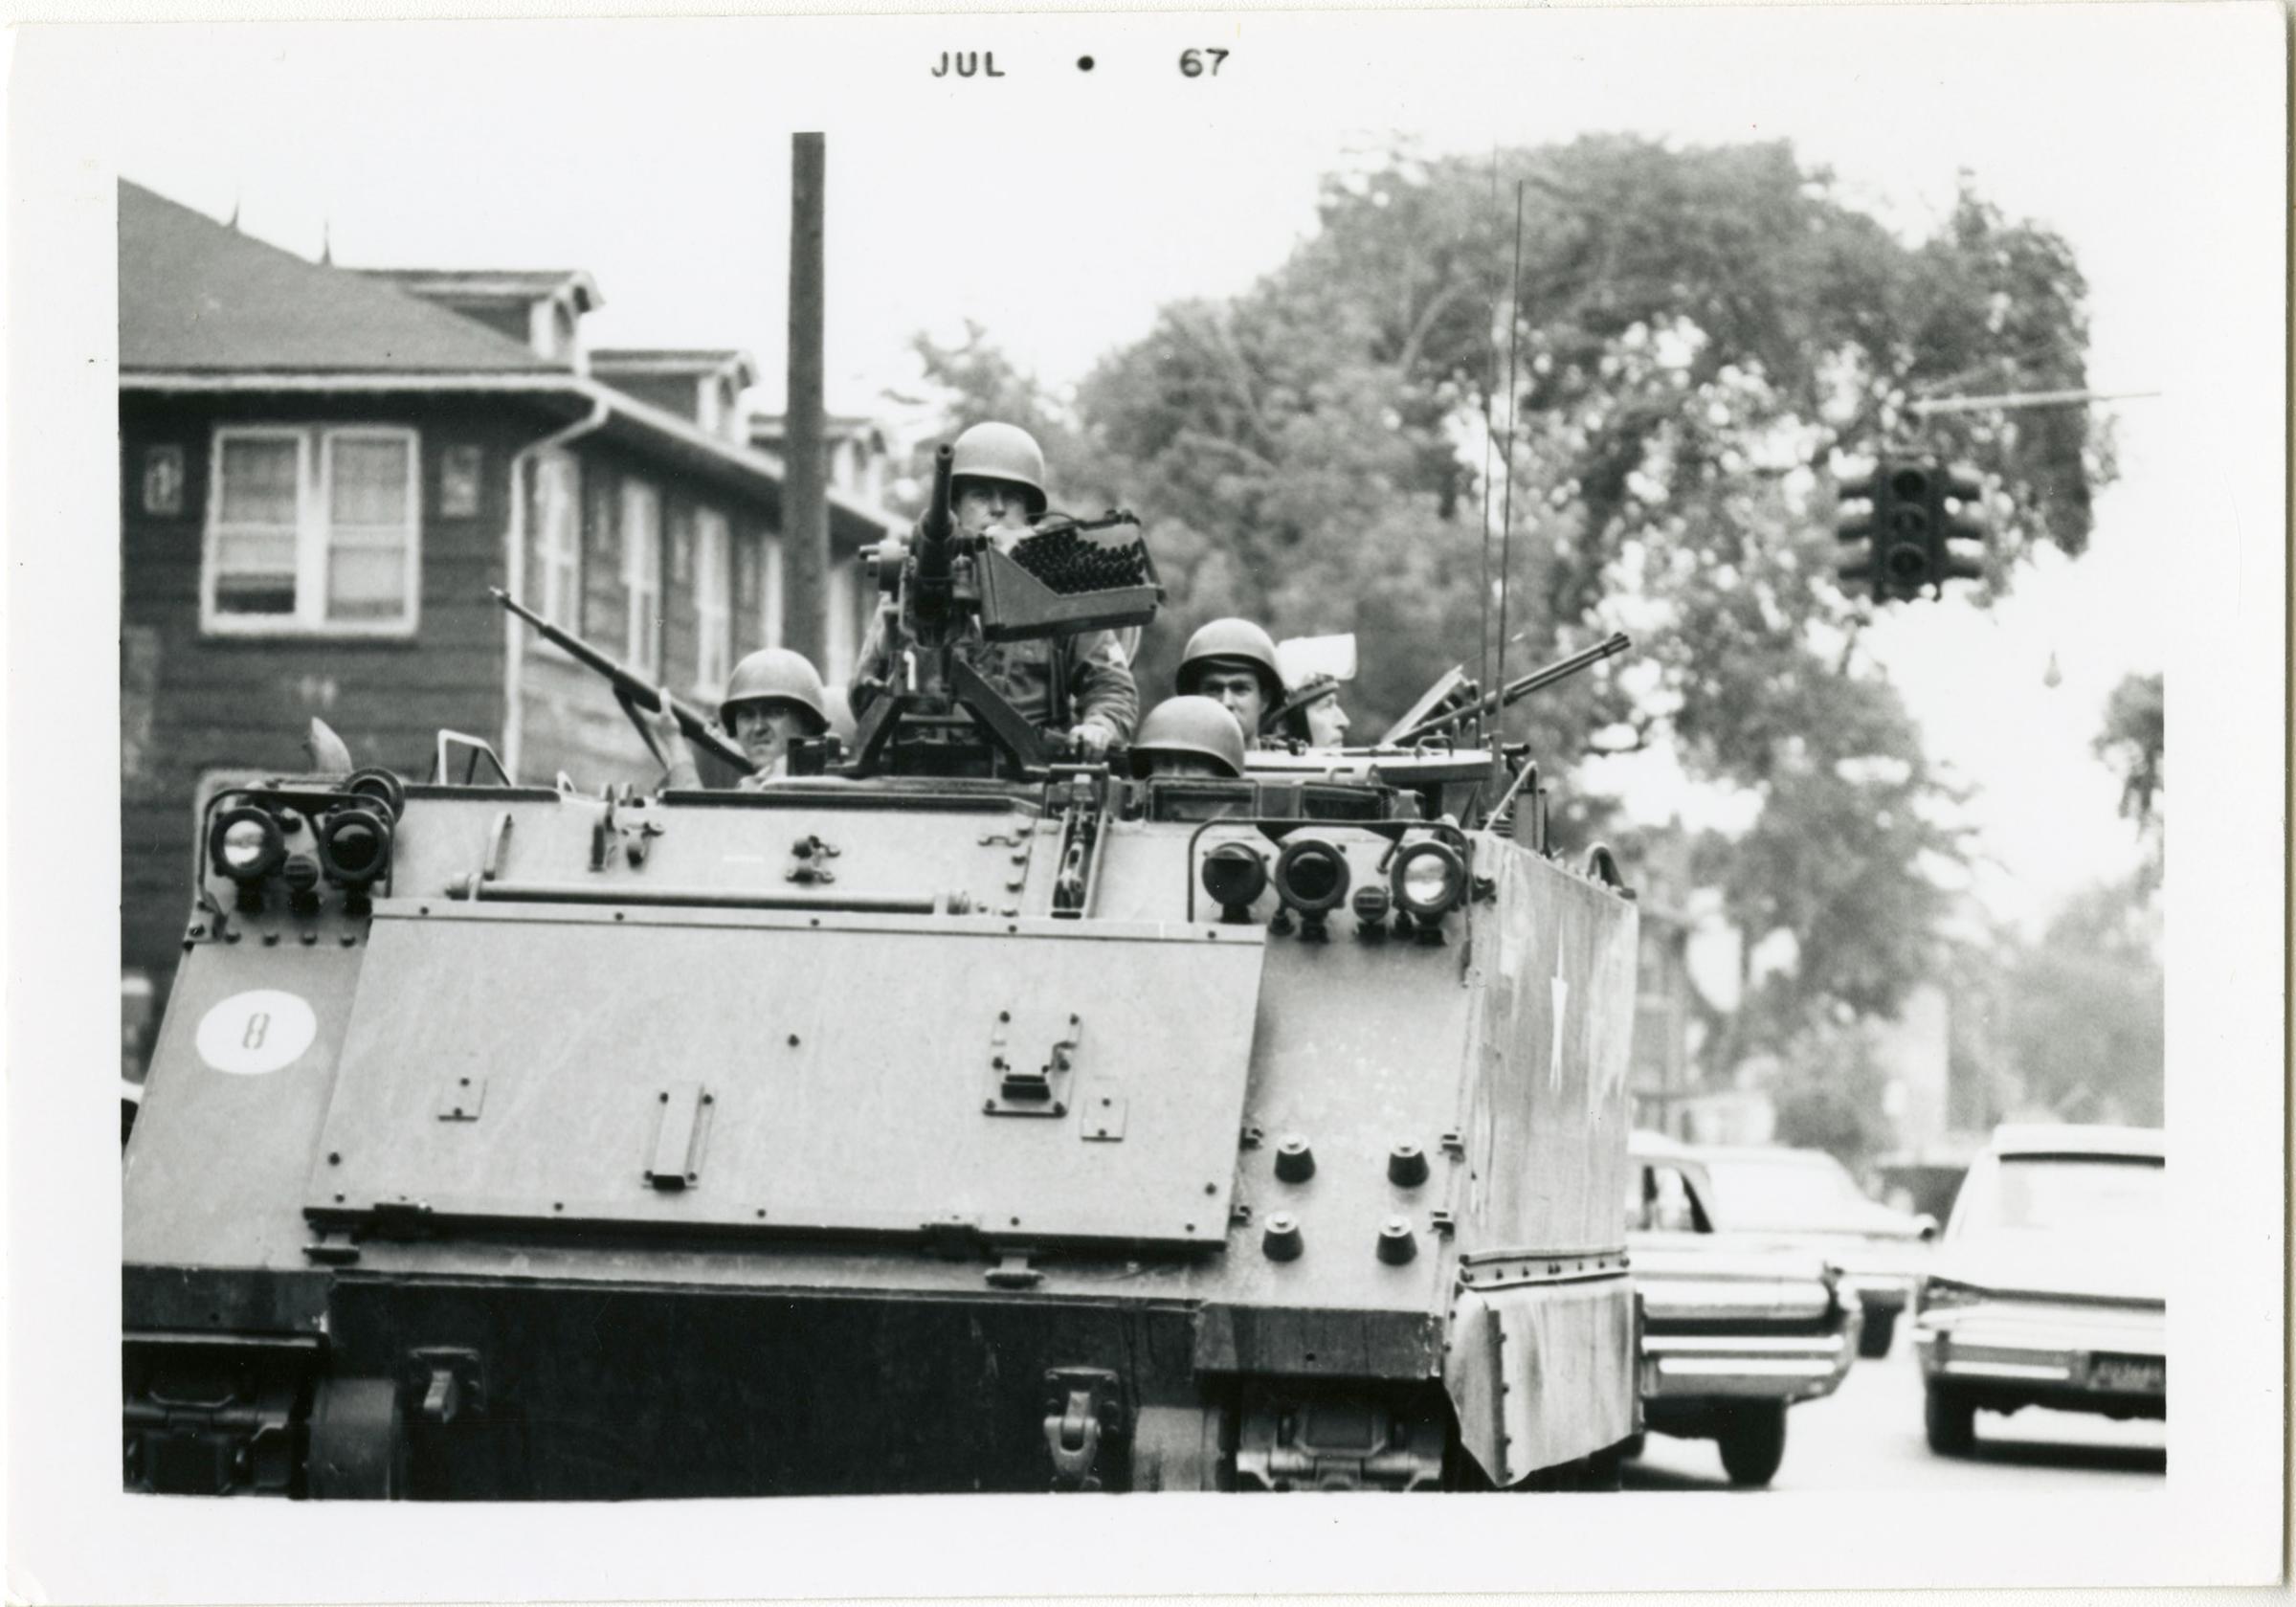 Michigan National Guardsmen patrol the streets of Detroit in an armored personal carrier, also known as a tank.